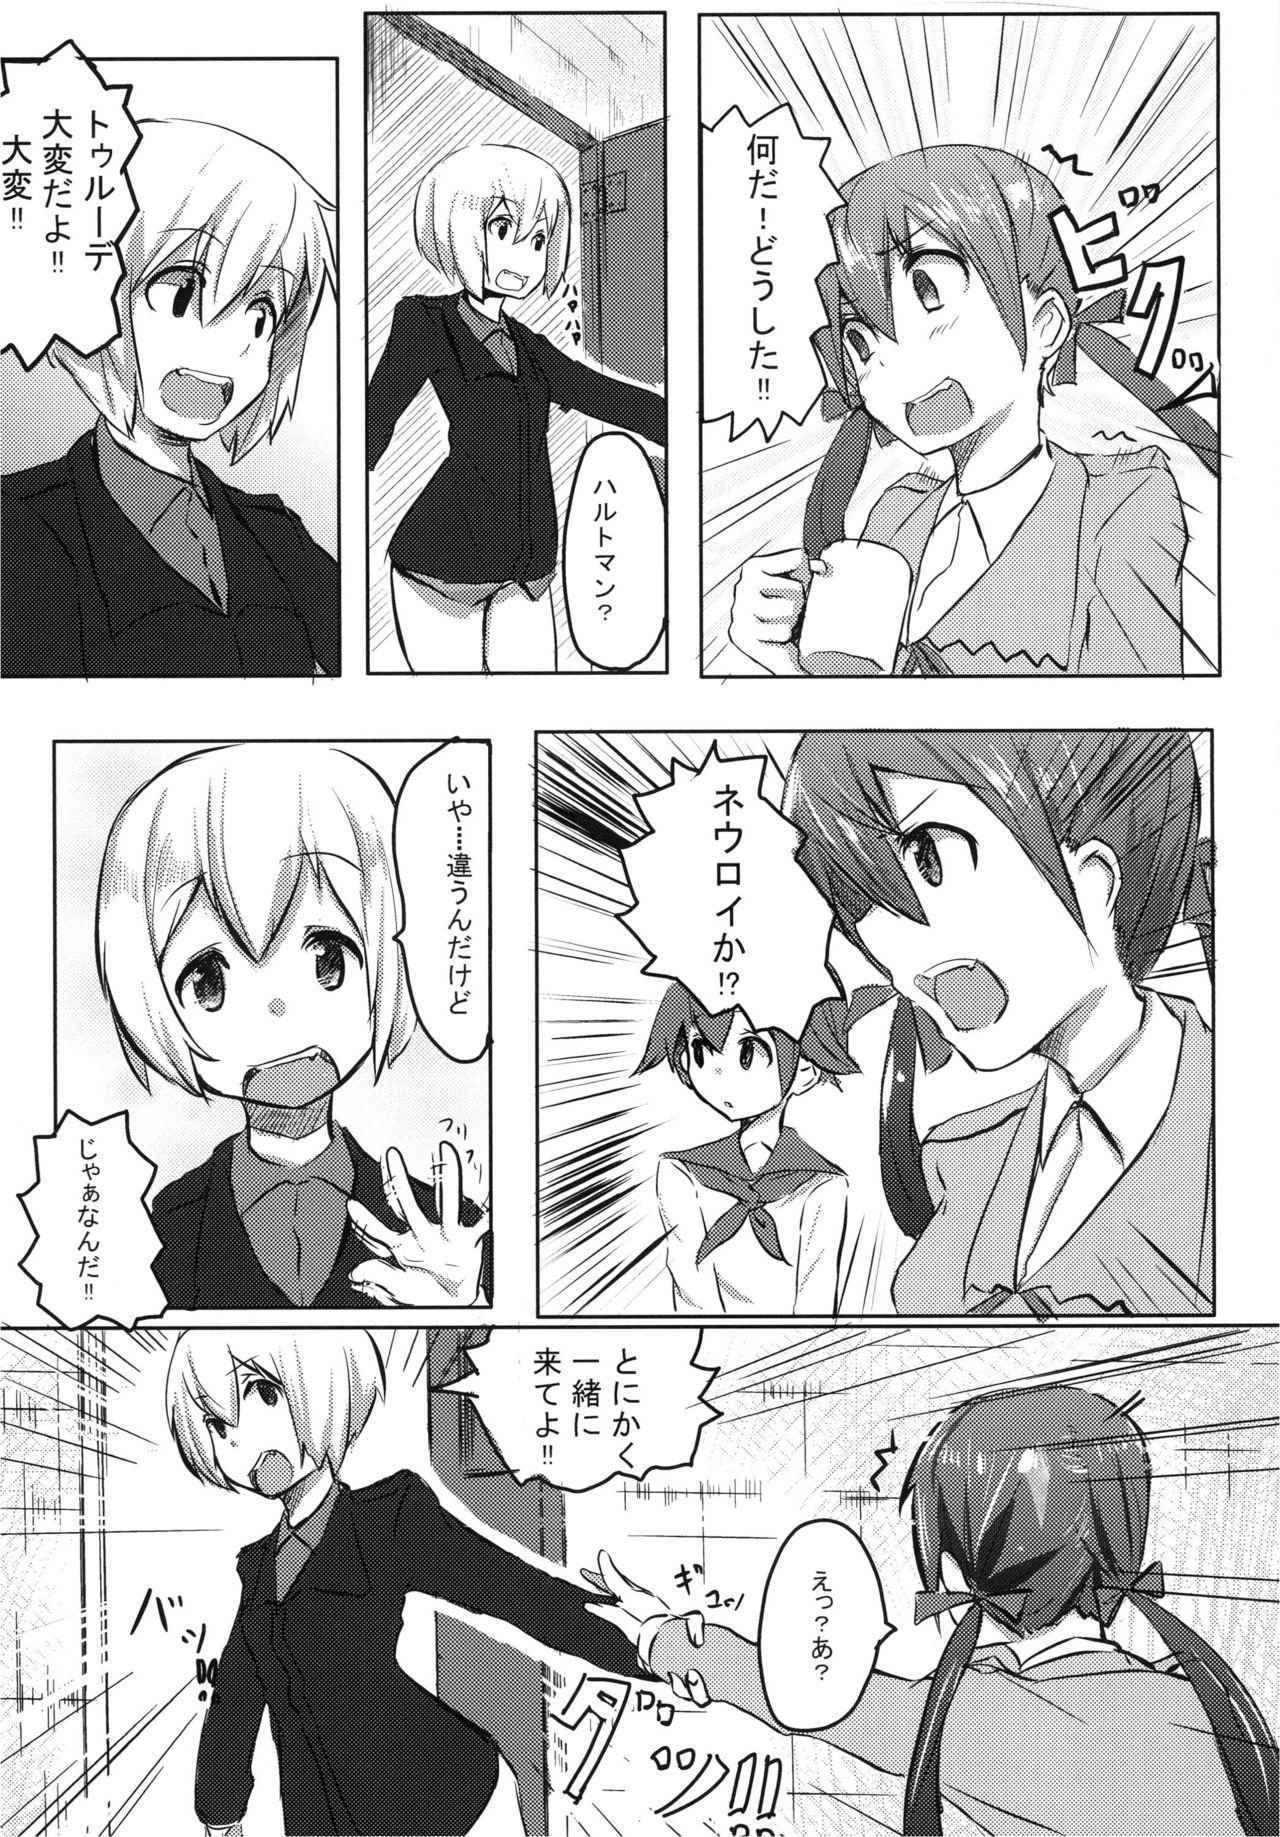 Reversecowgirl FLIEGERASS - Strike witches Selfie - Page 5